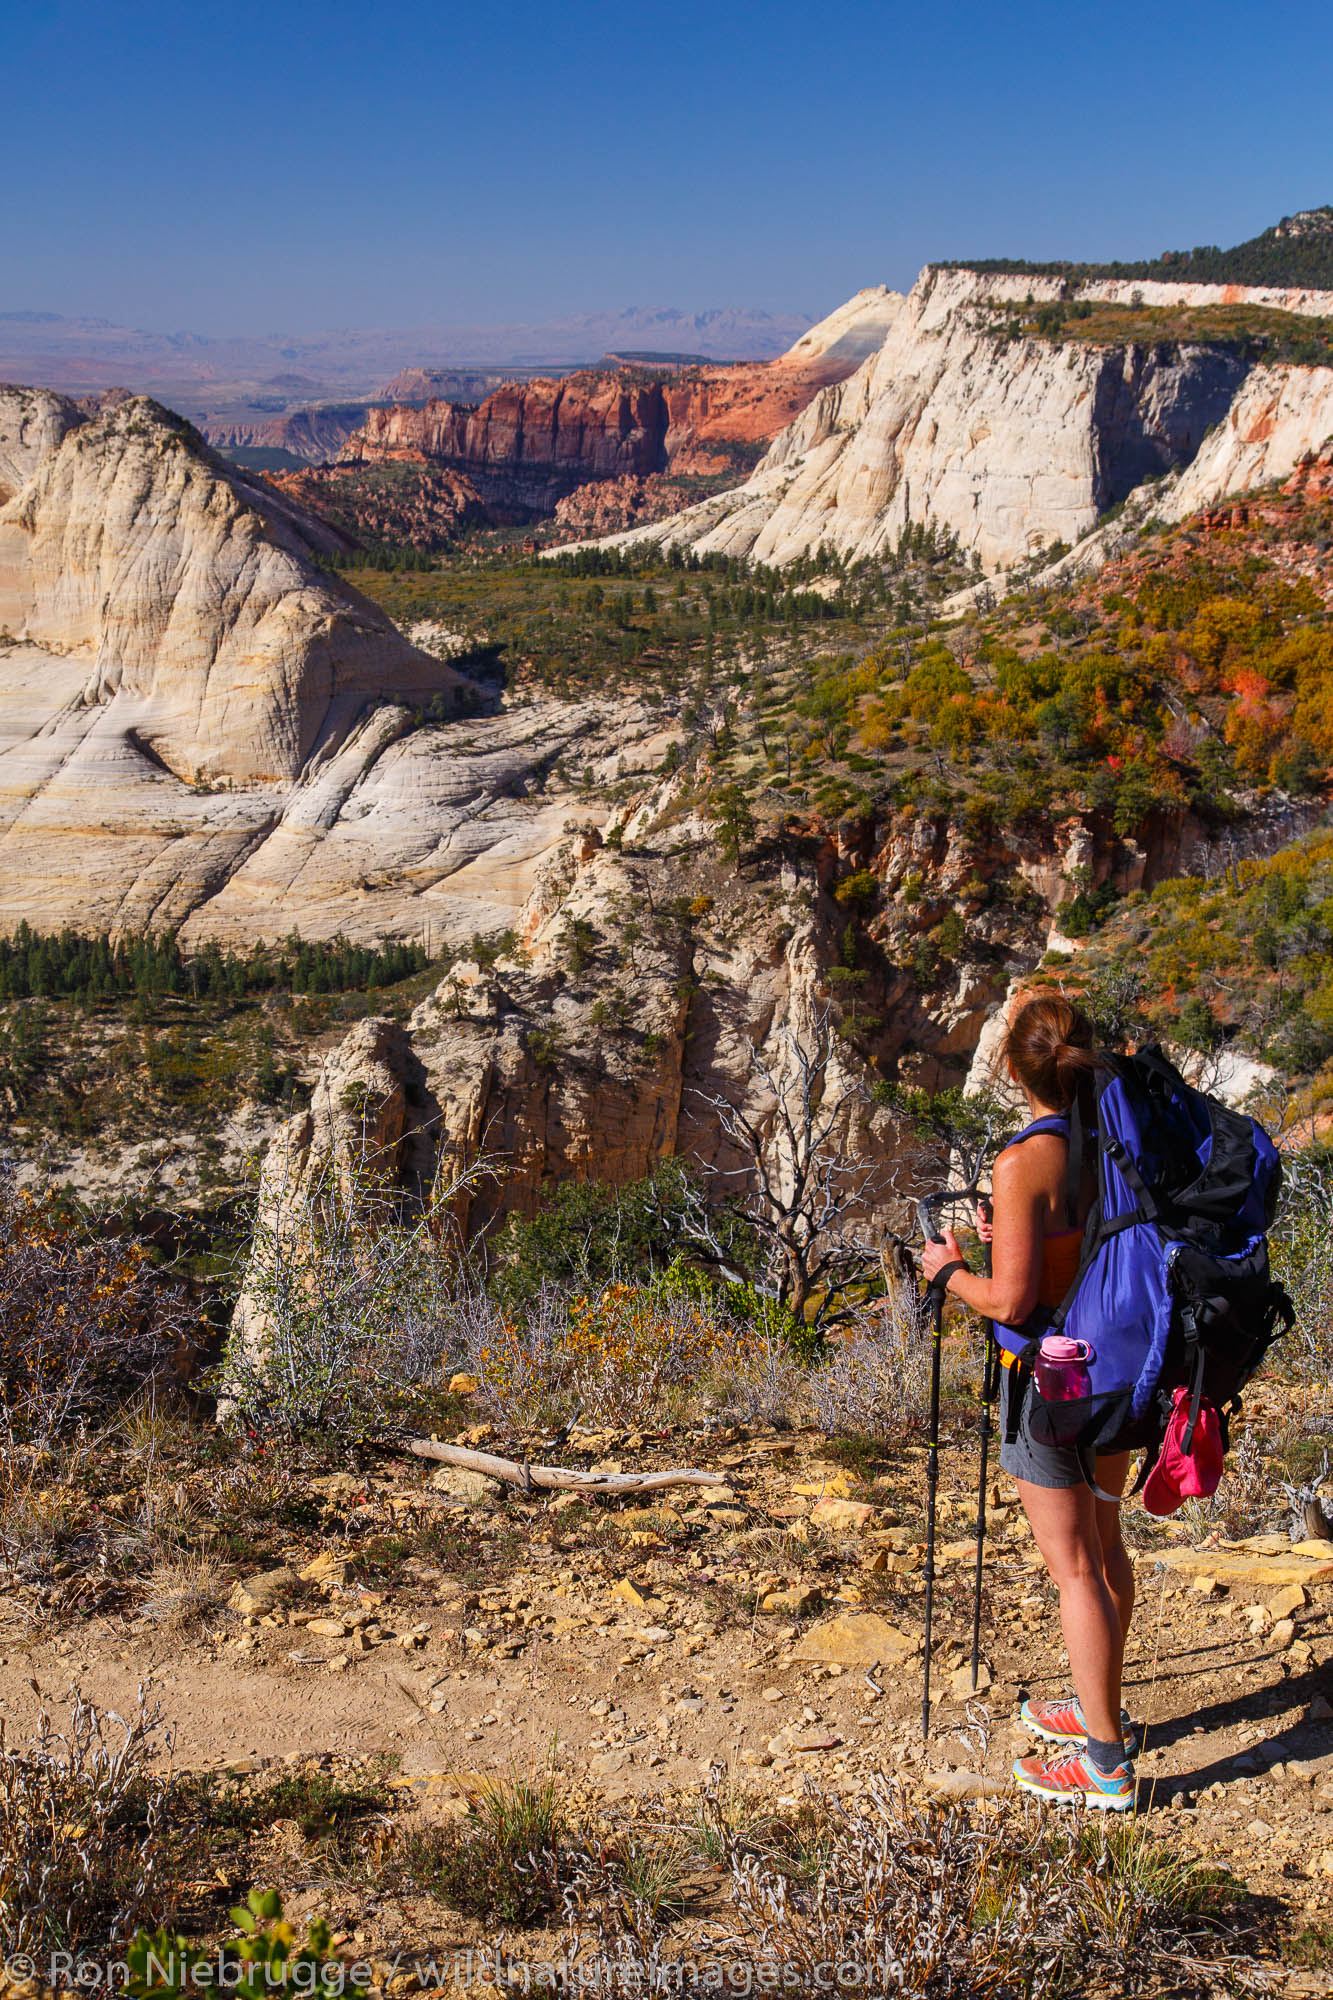 Backpacking on the West Rim Trail, Zion National Park, Utah.